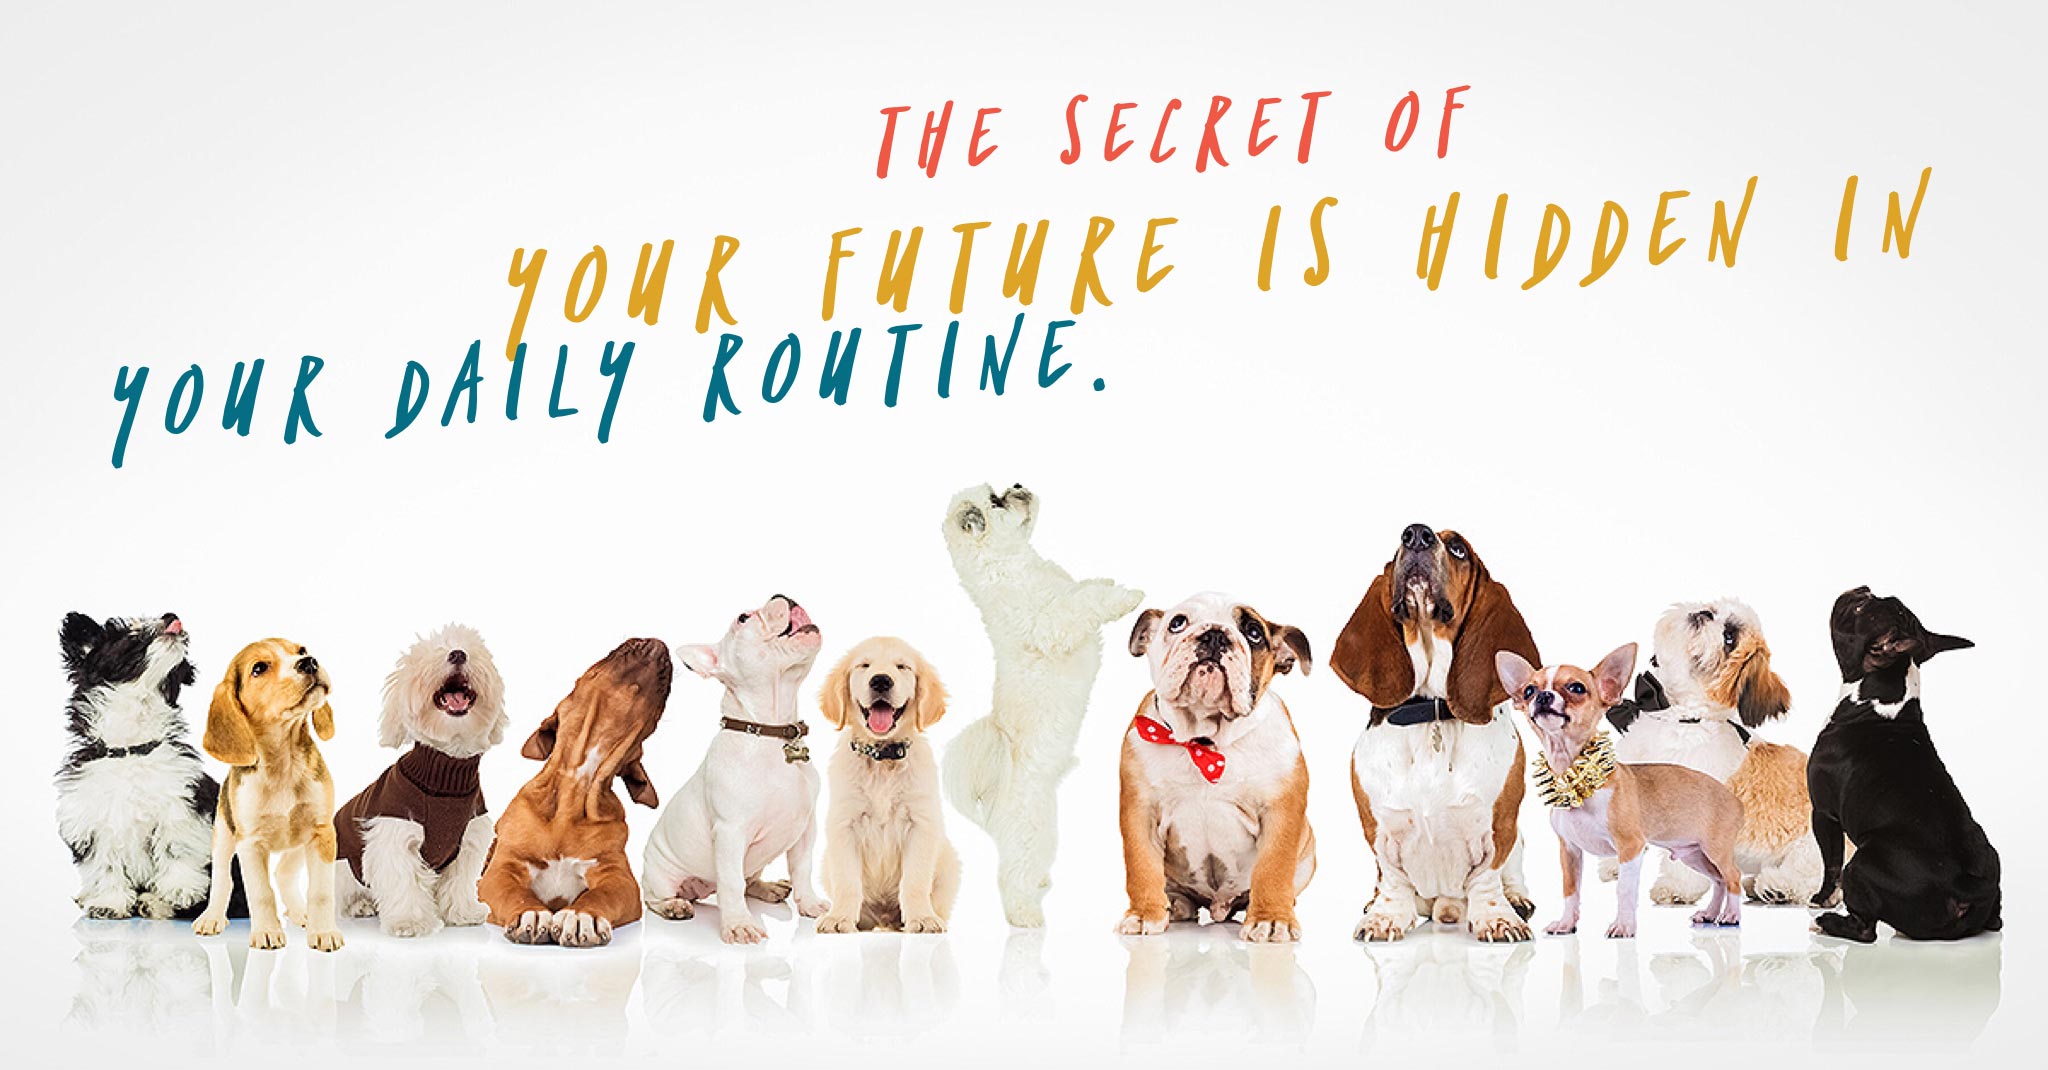 puppies looking up at words that say “the secret of your future is hidden in your daily routine”